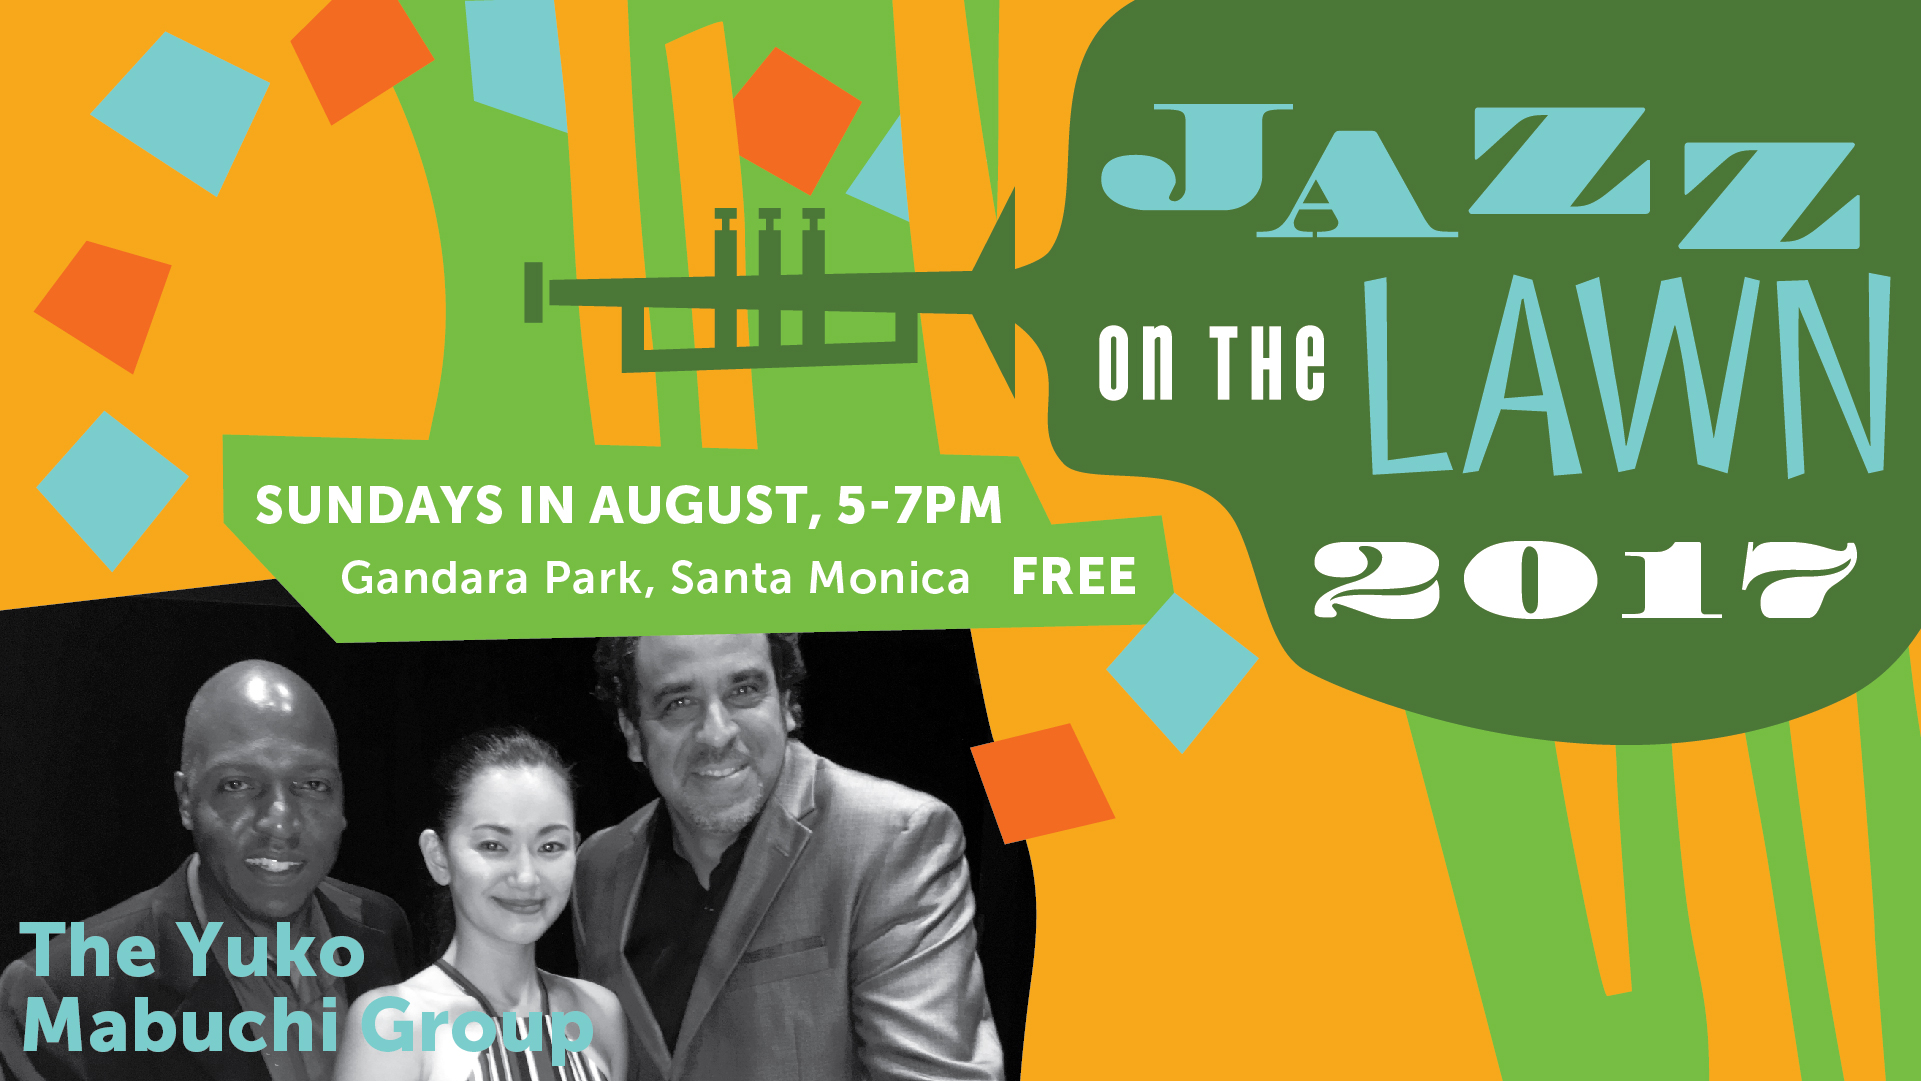 12th Annual Jazz on the Lawn presents The Yuko Mabuchi Group